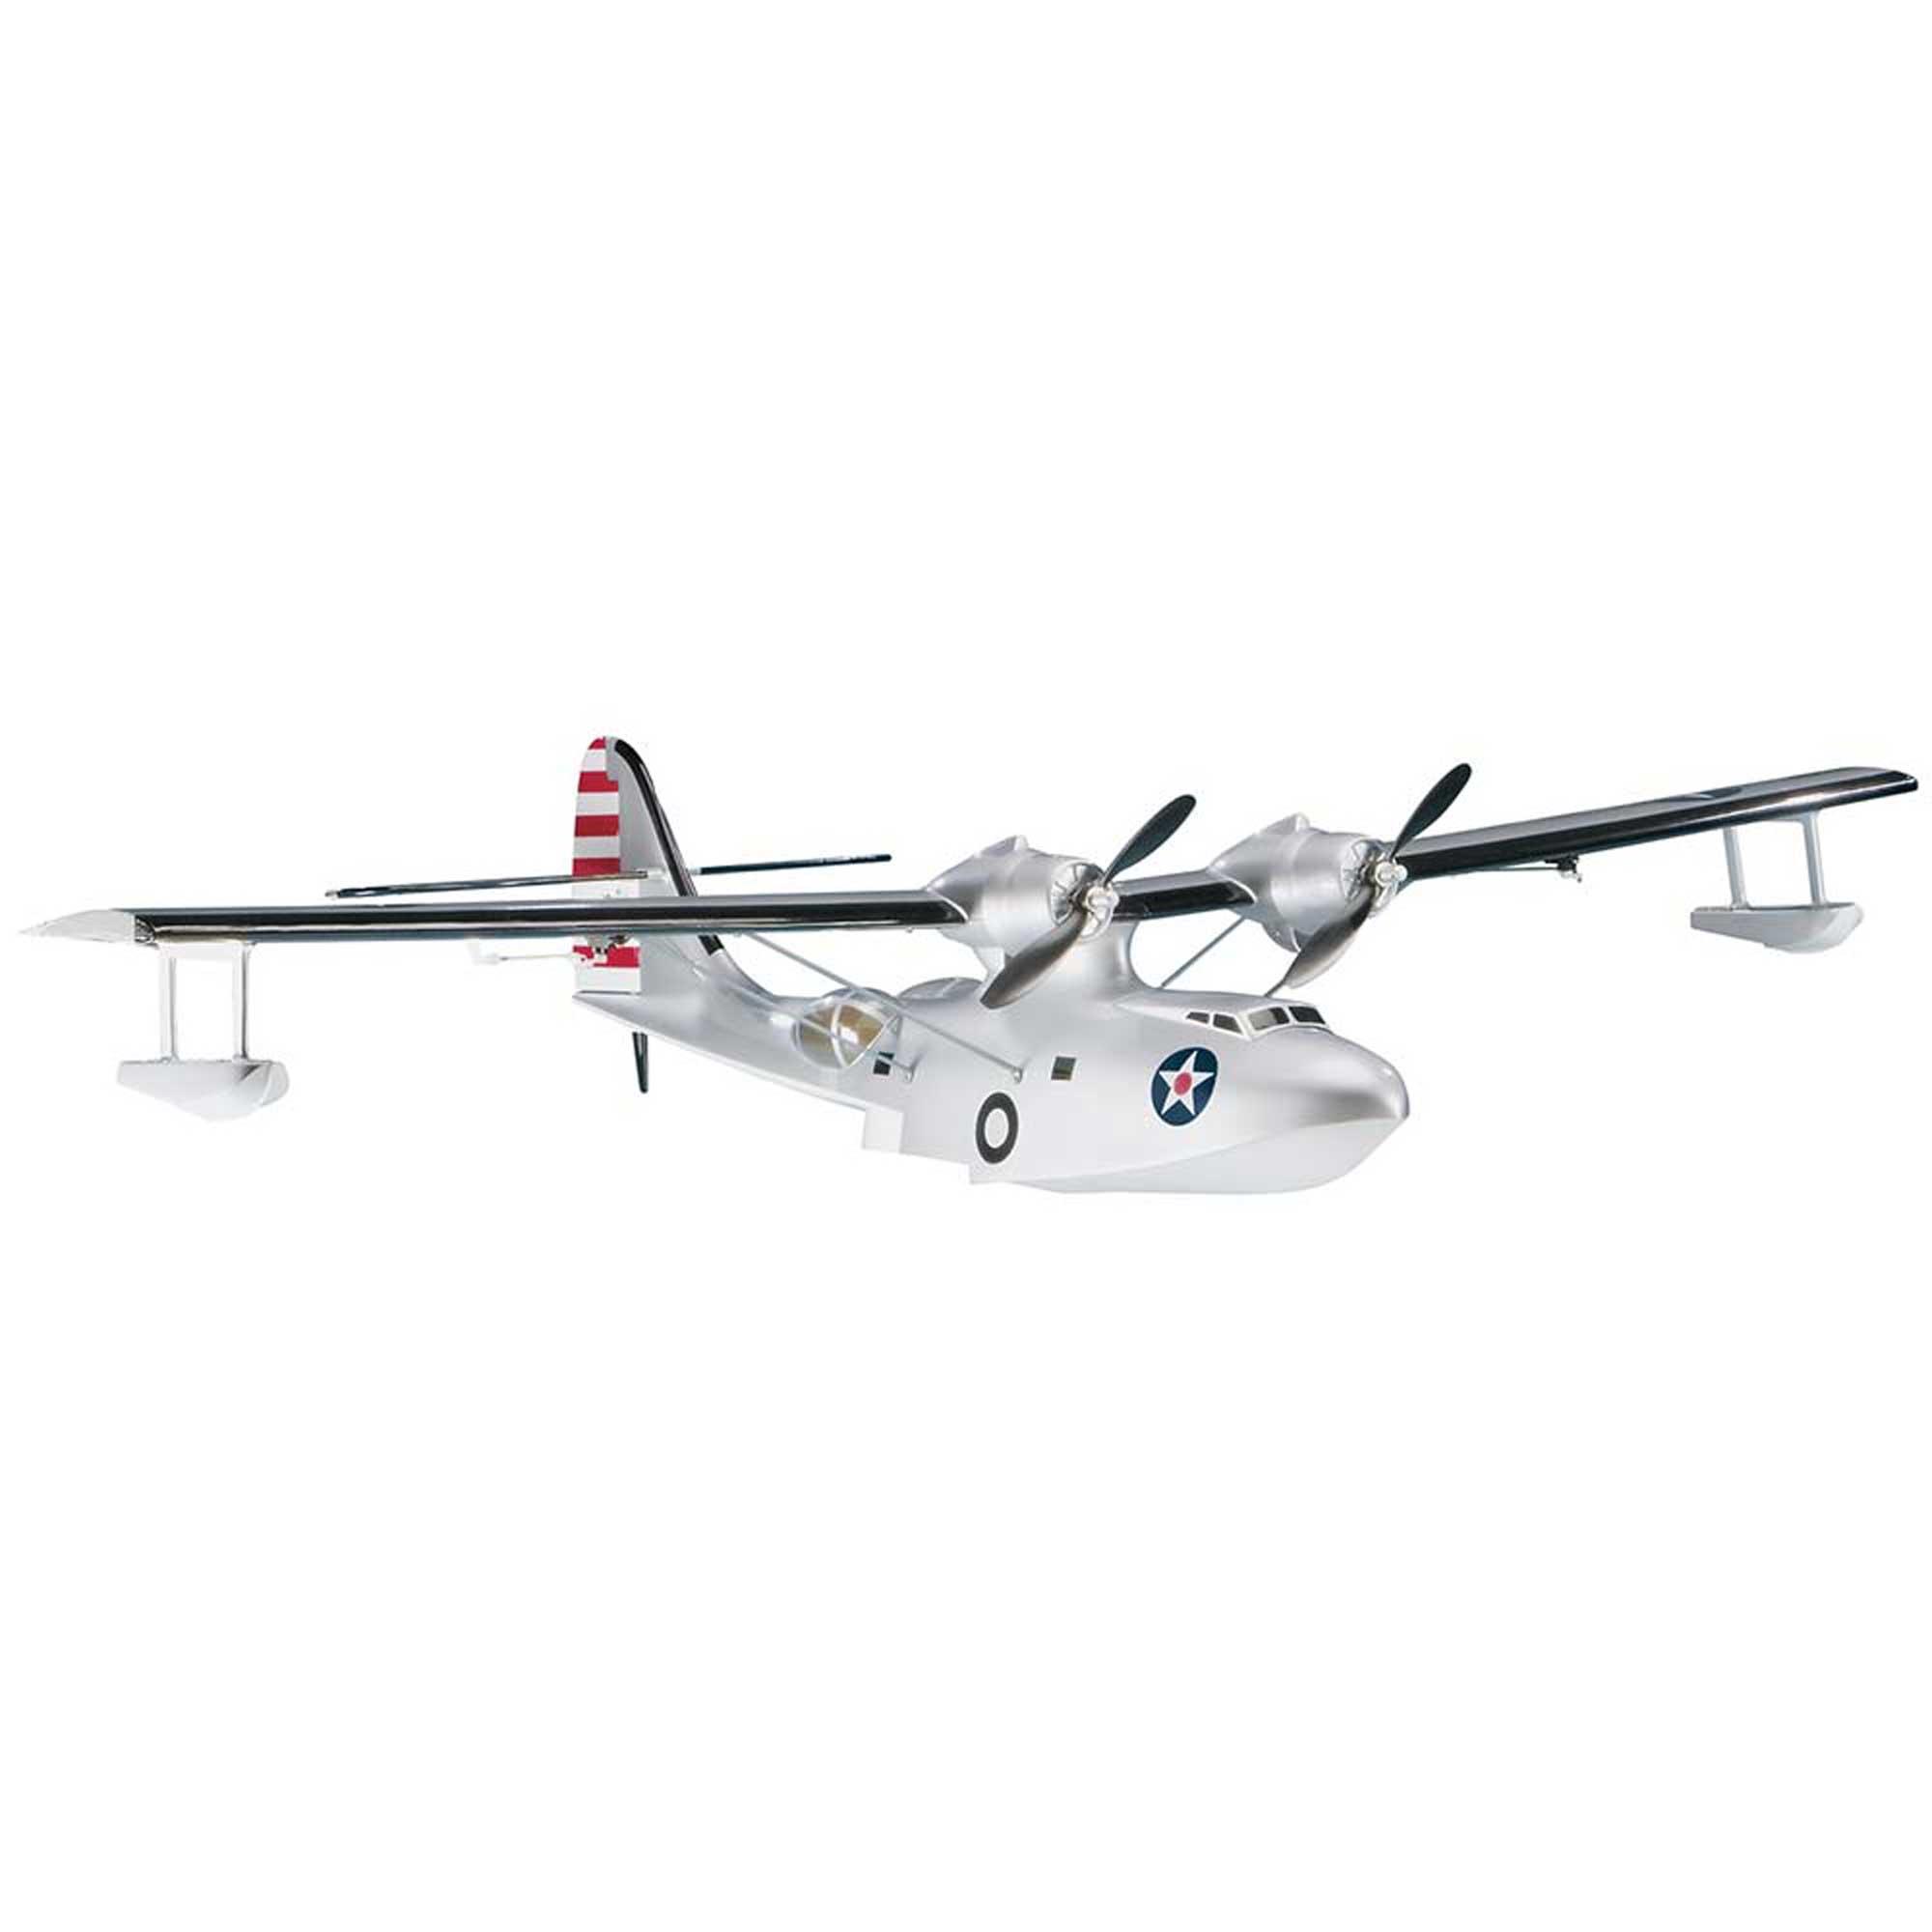 Catalina Rc Plane: Durable and Responsive: The Catalina RC Plane for High-Flying Fun